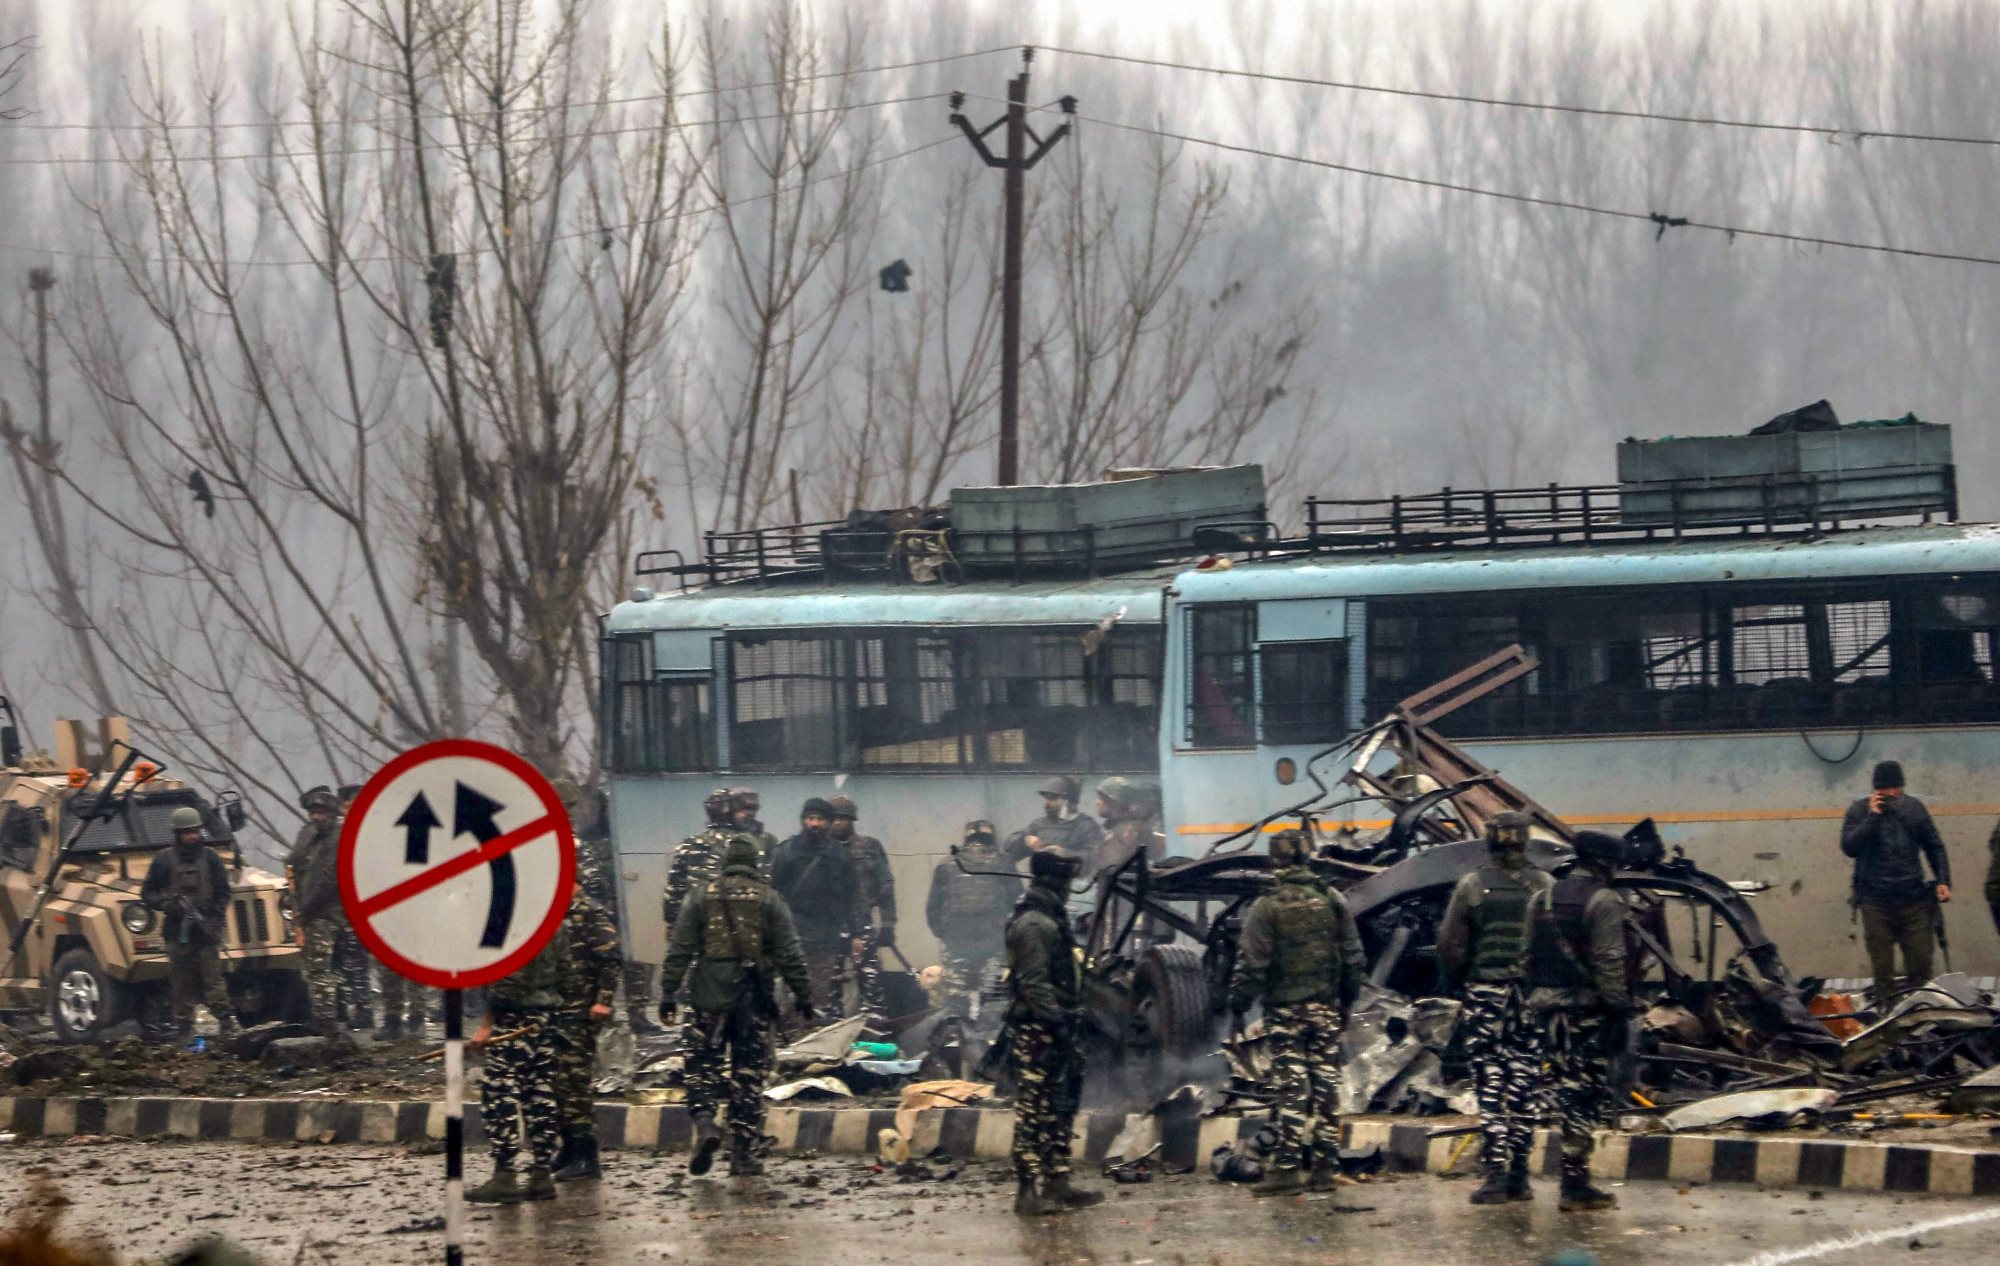 Lathepora: Security personnel carry out the rescue and relief works at the site of suicide bomb attack at Lathepora Awantipora in Pulwama district of south Kashmir, Thursday, February 14, 2019. At least 30 CRPF jawans were killed and dozens other injured when a CRPF convoy was attacked. (PTI Photo/S Irfan)  (PTI2_14_2019_000167B)